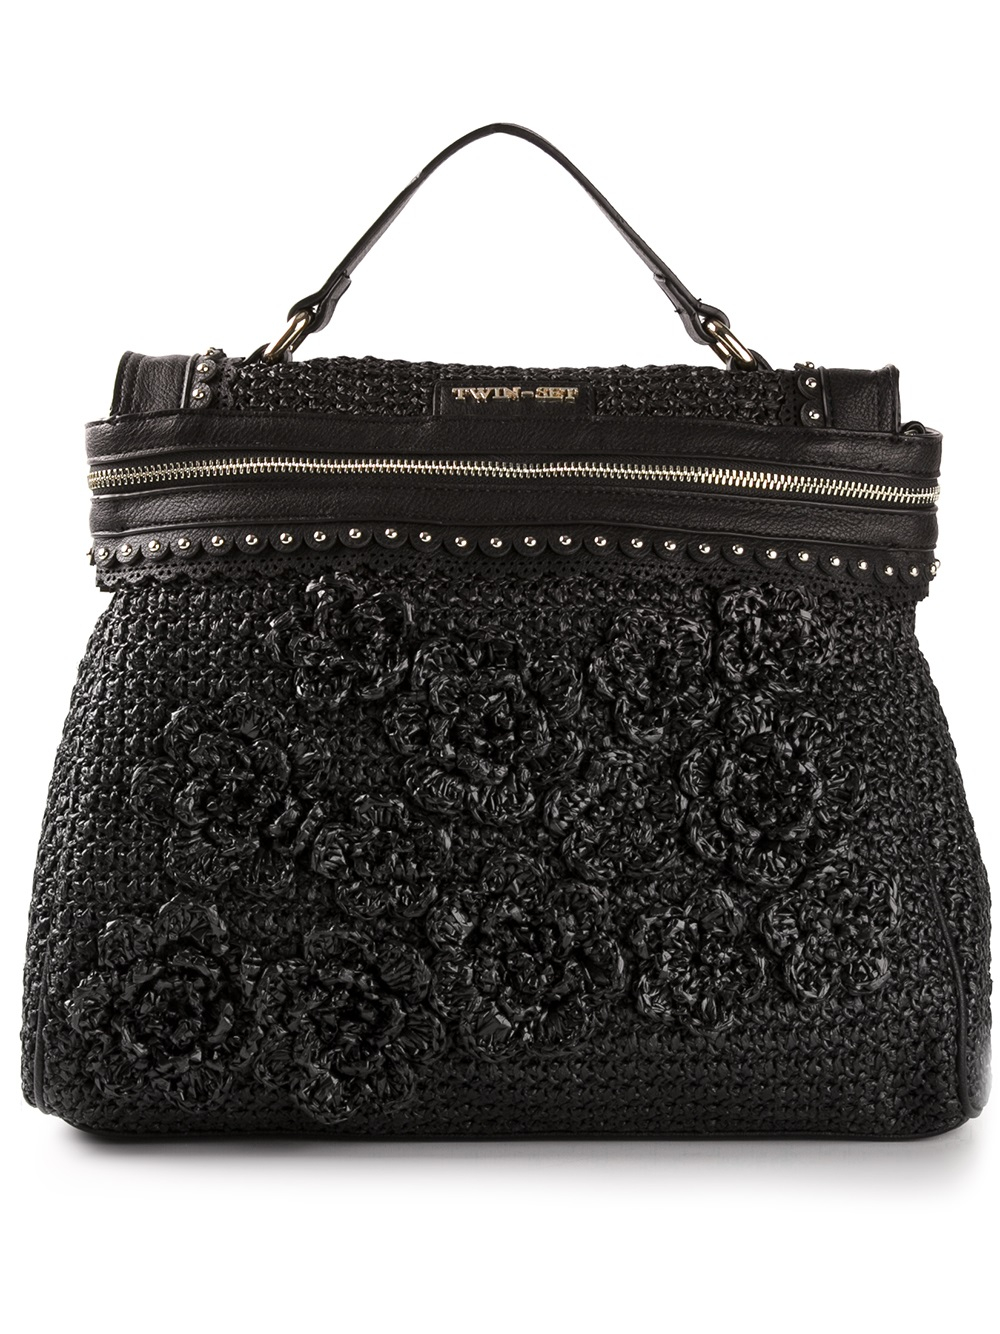 Twin set Floral Crochet Tote Bag in Black | Lyst